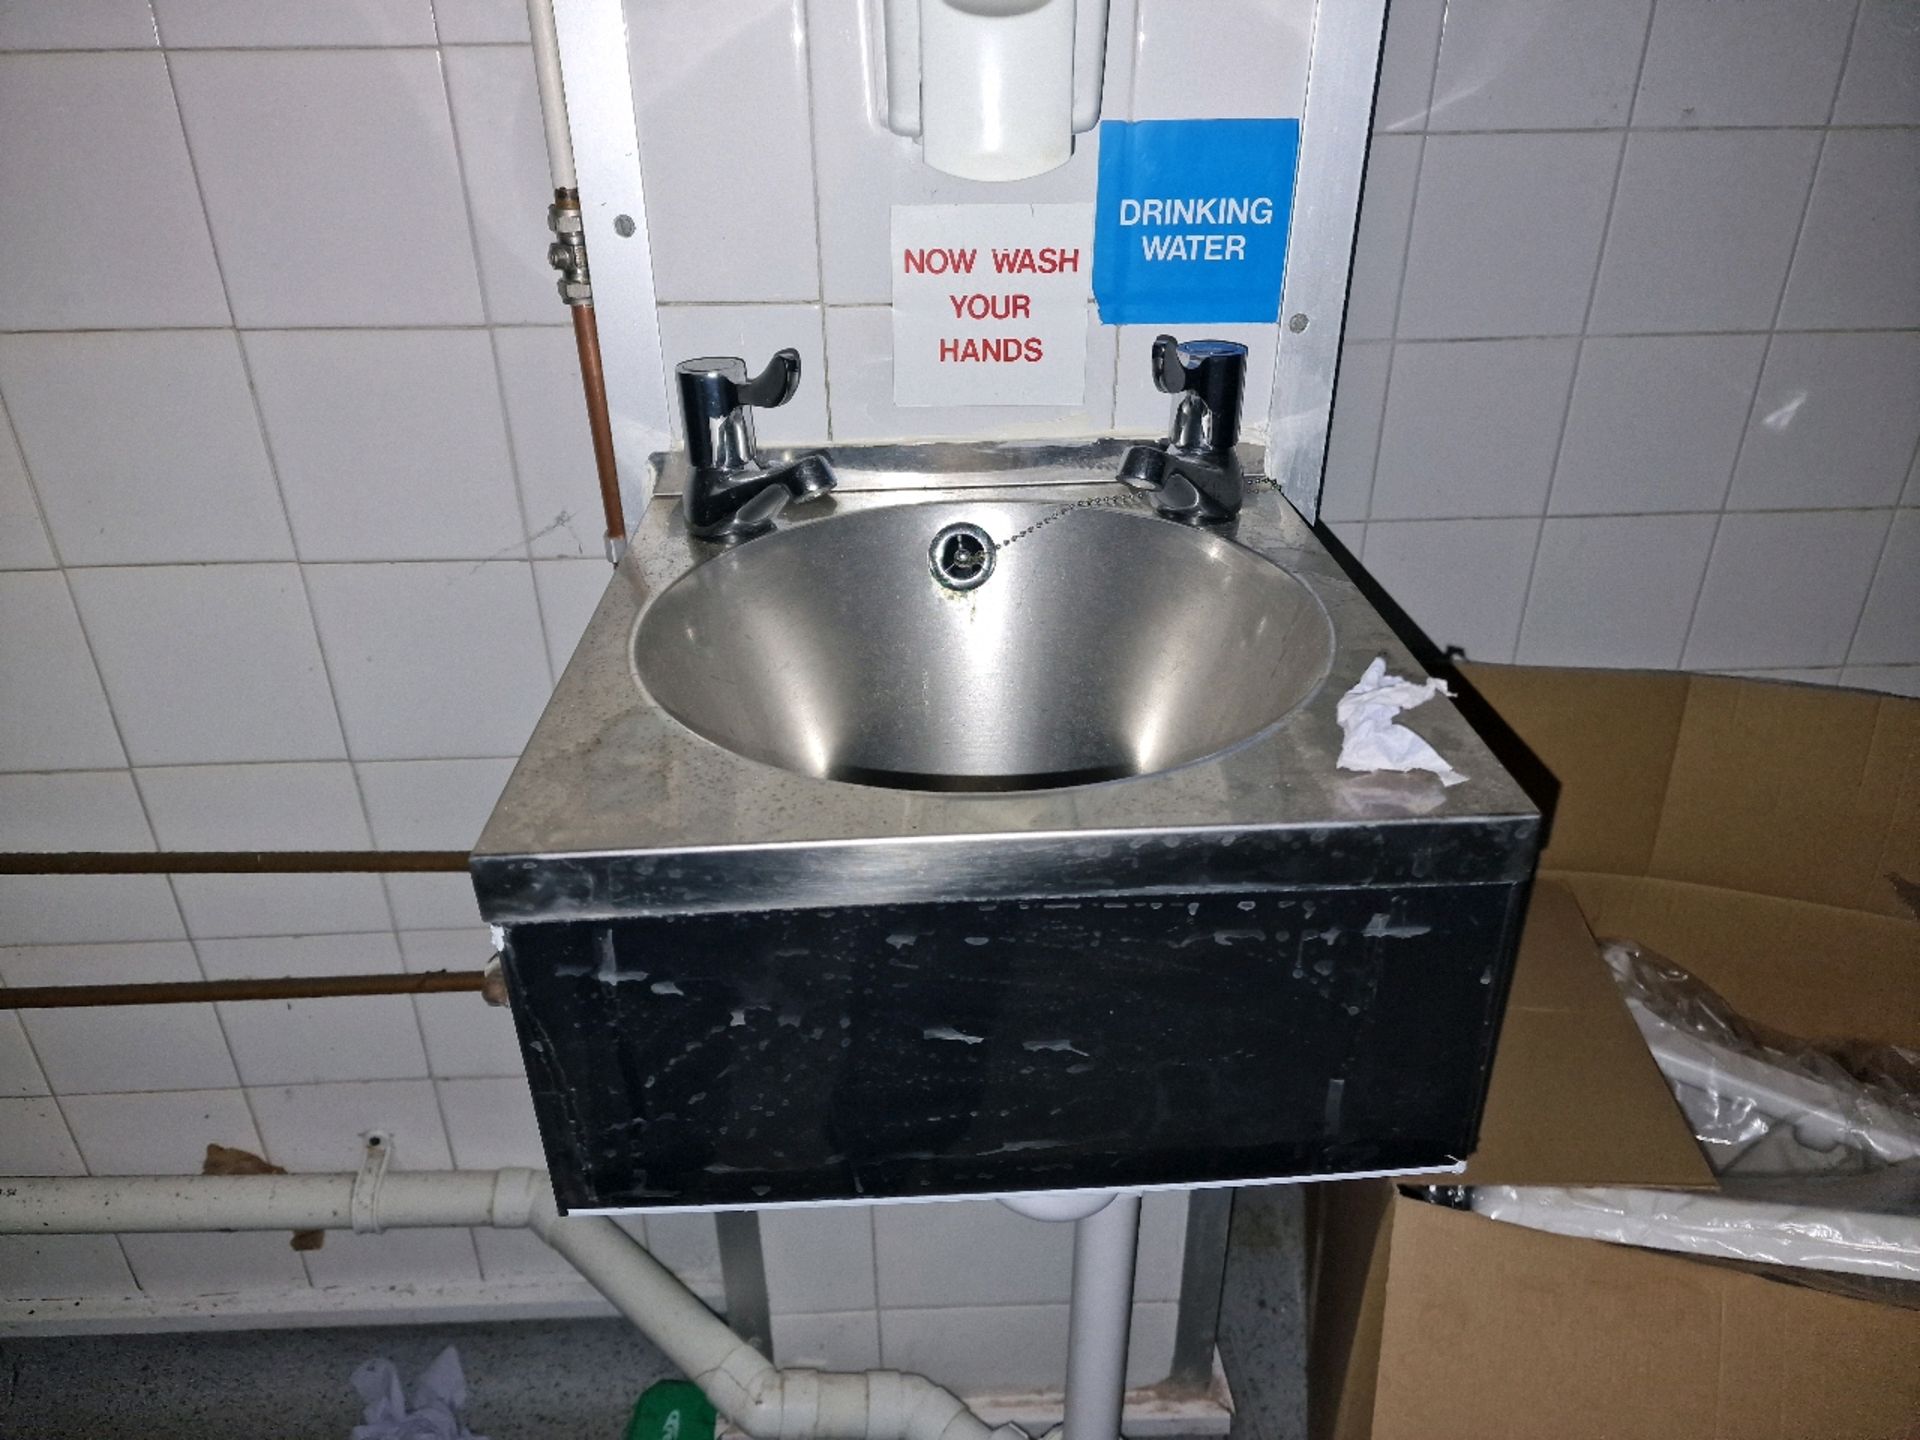 Stainless Steel Wall Sink